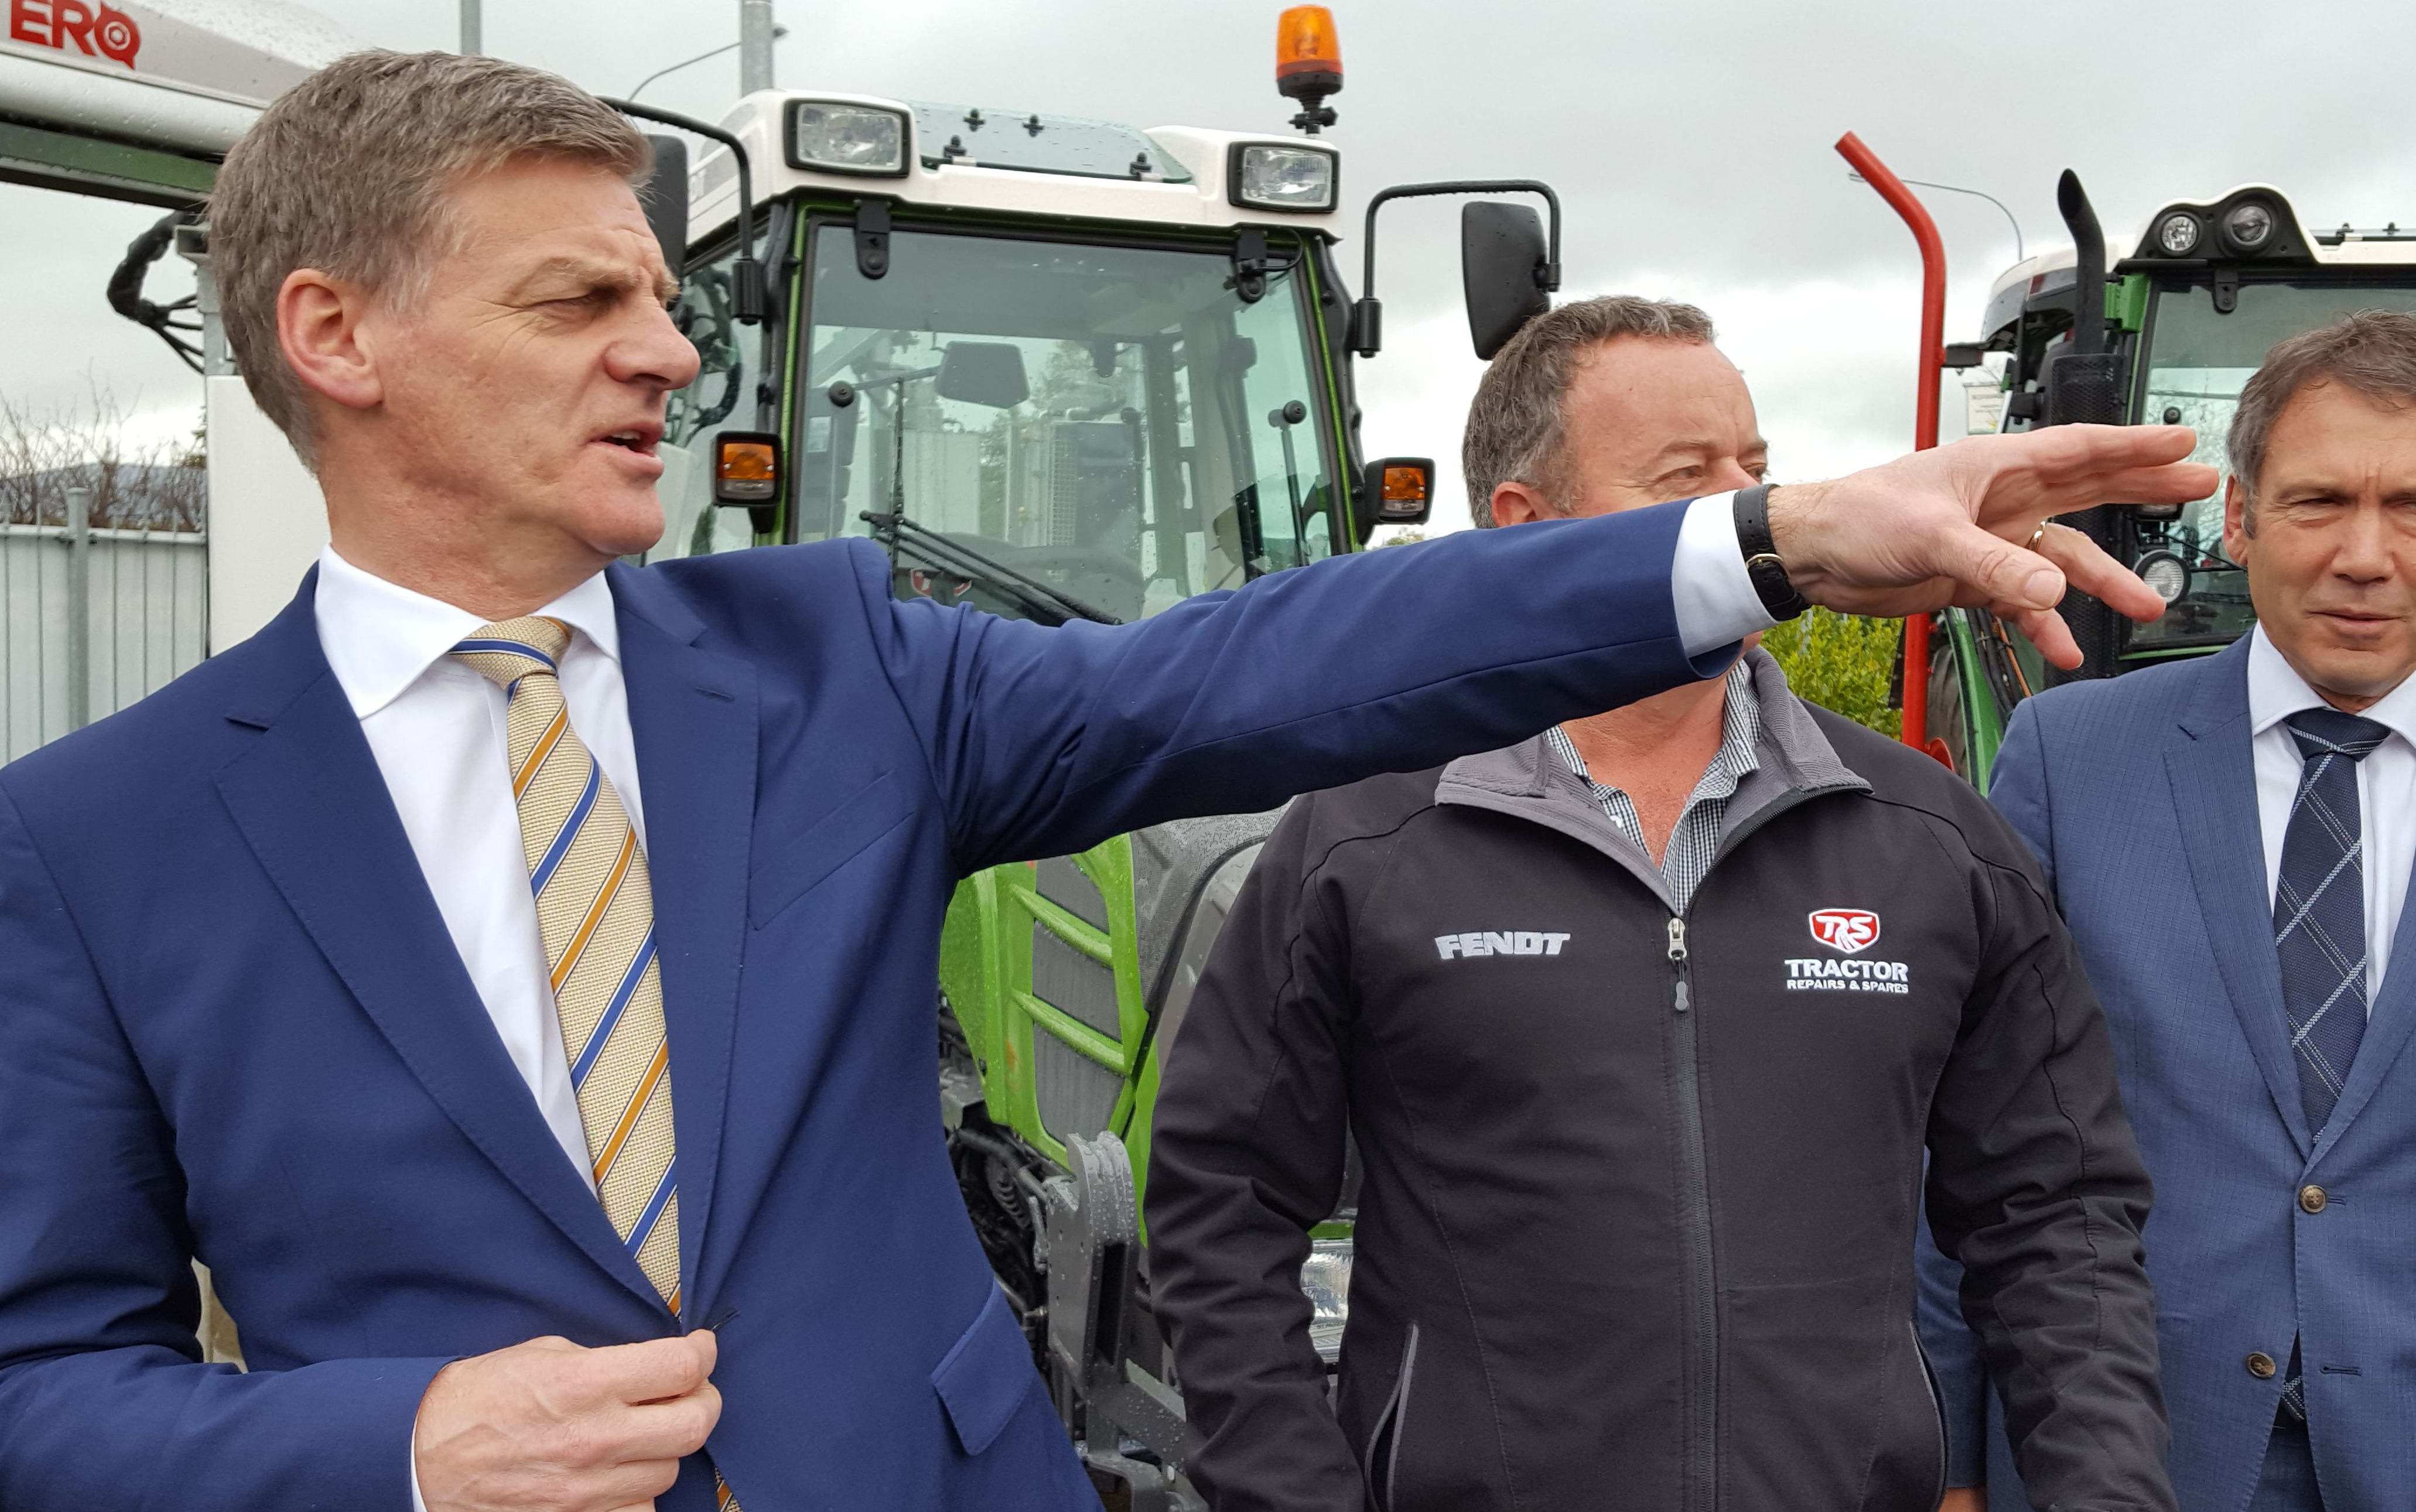 Bill English on the campaign trail.